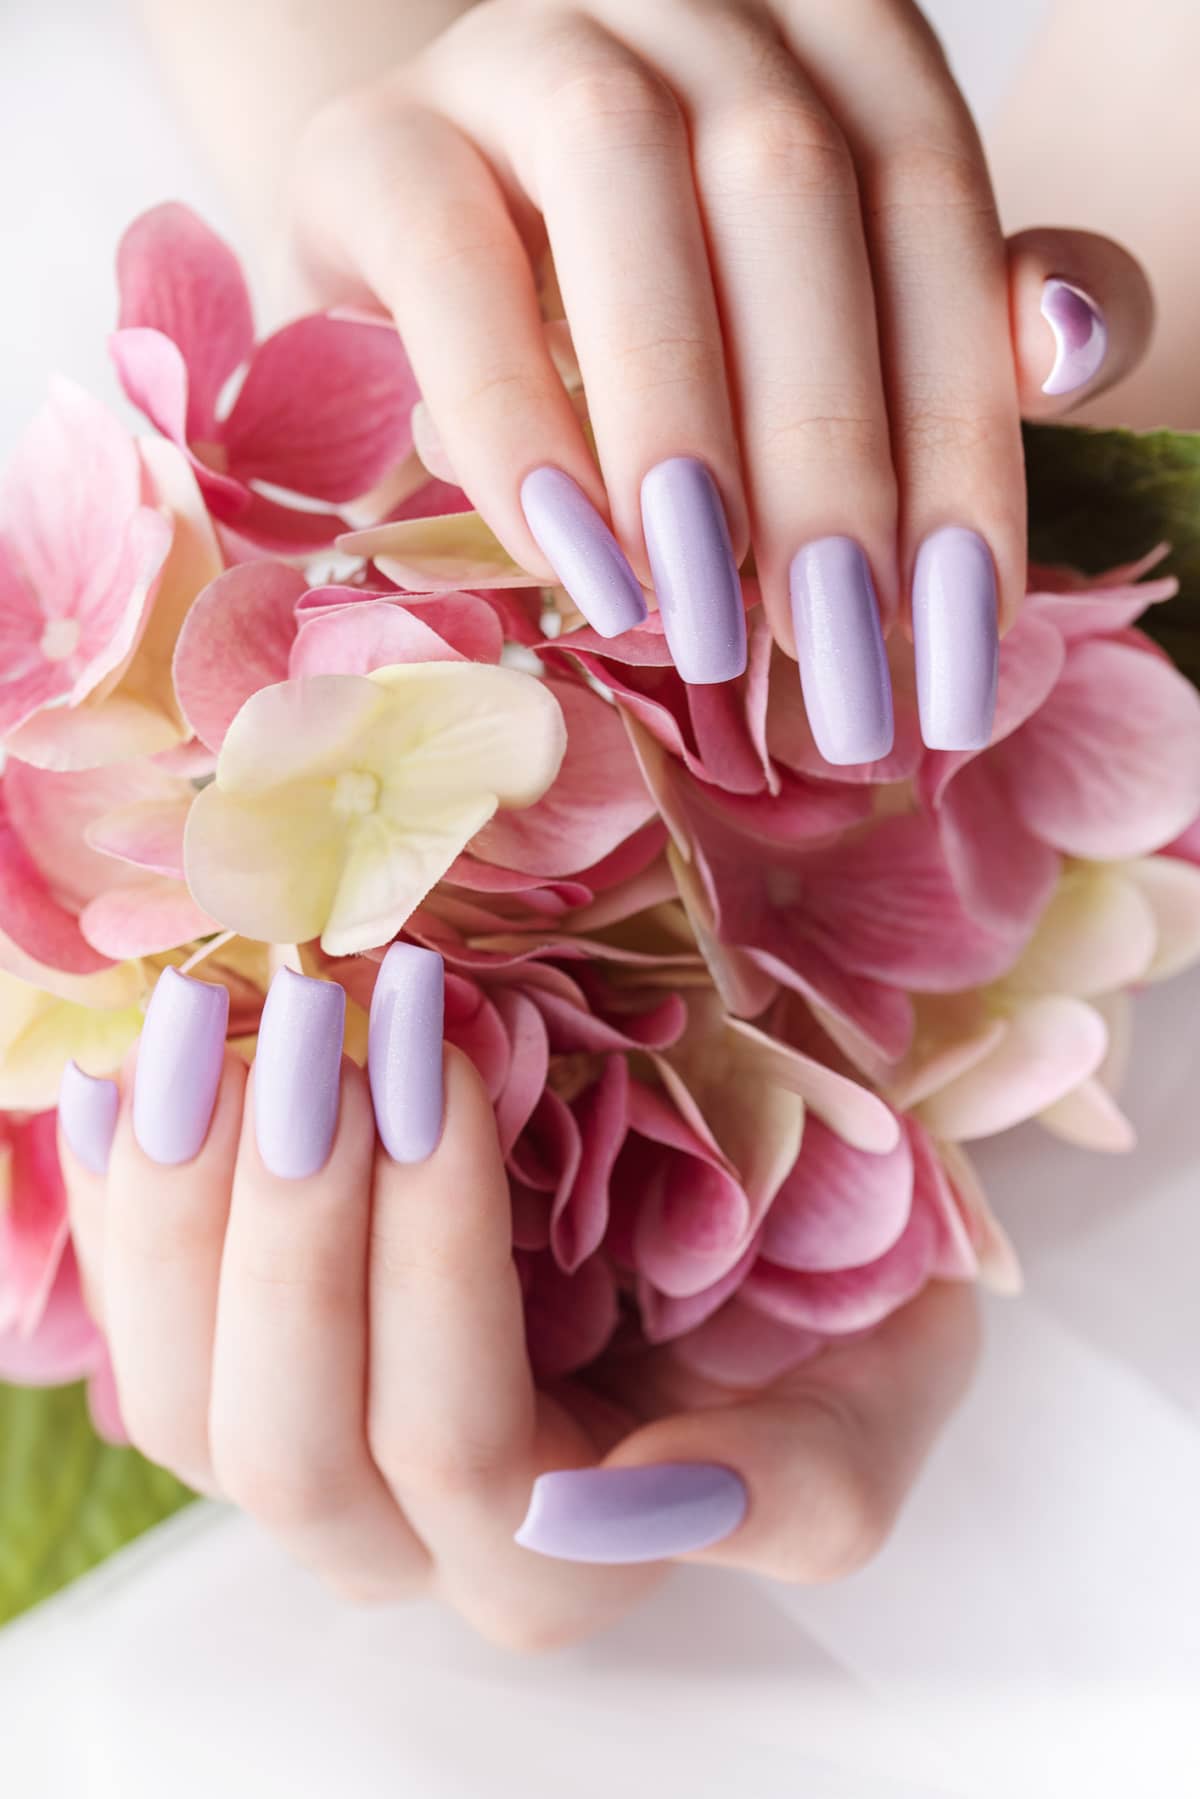 Woman's hands with delicate purple manicure